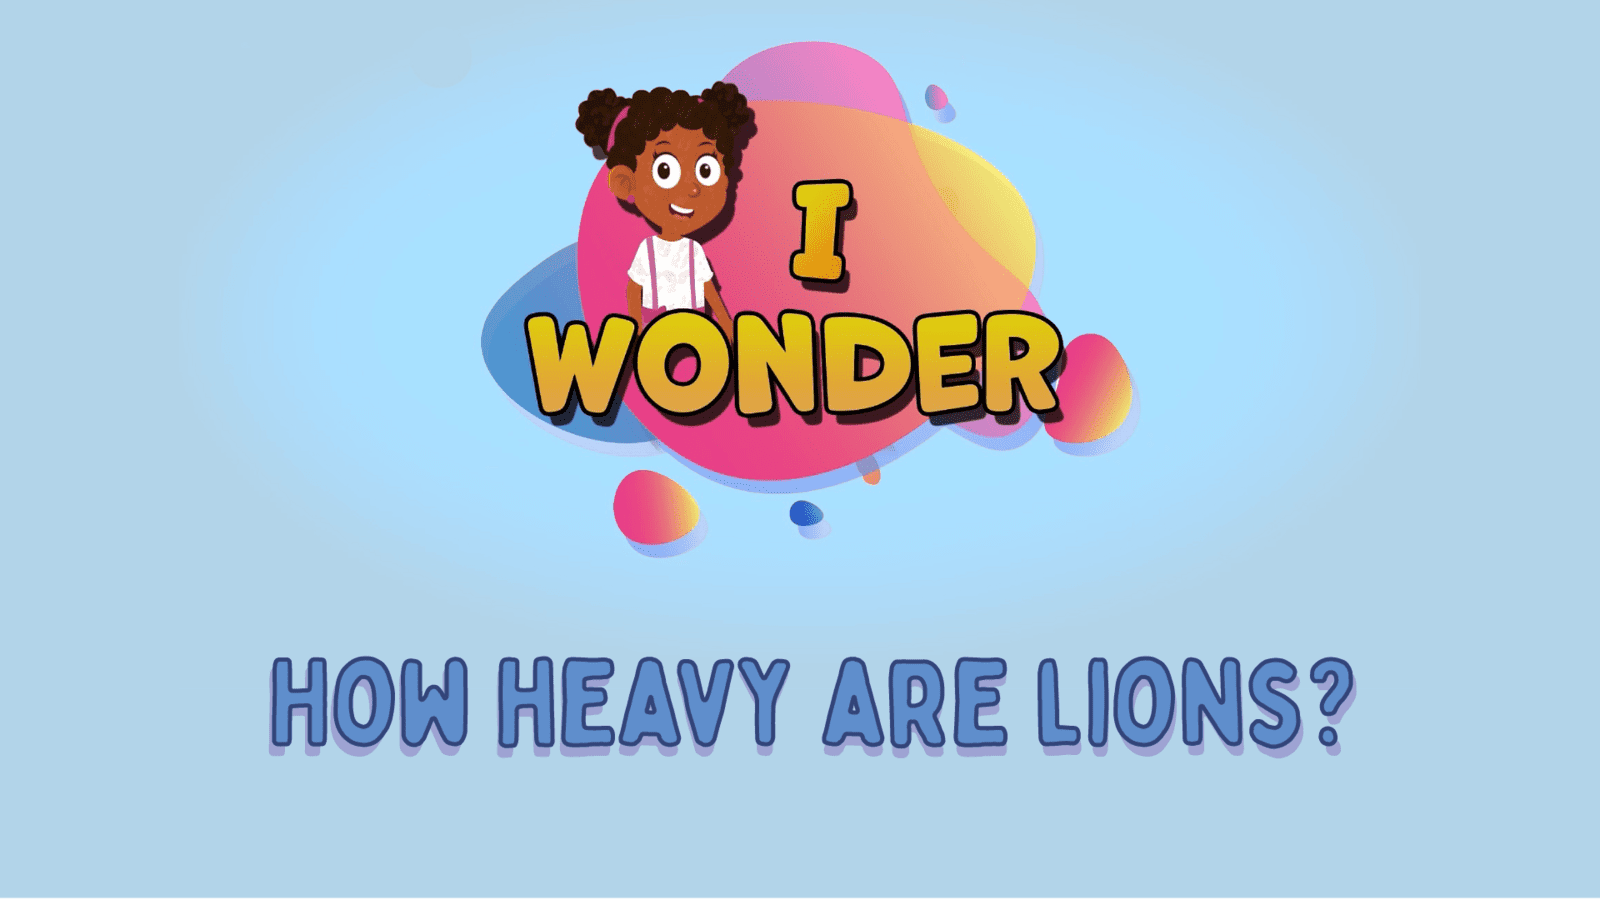 How Heavy Are Lions?